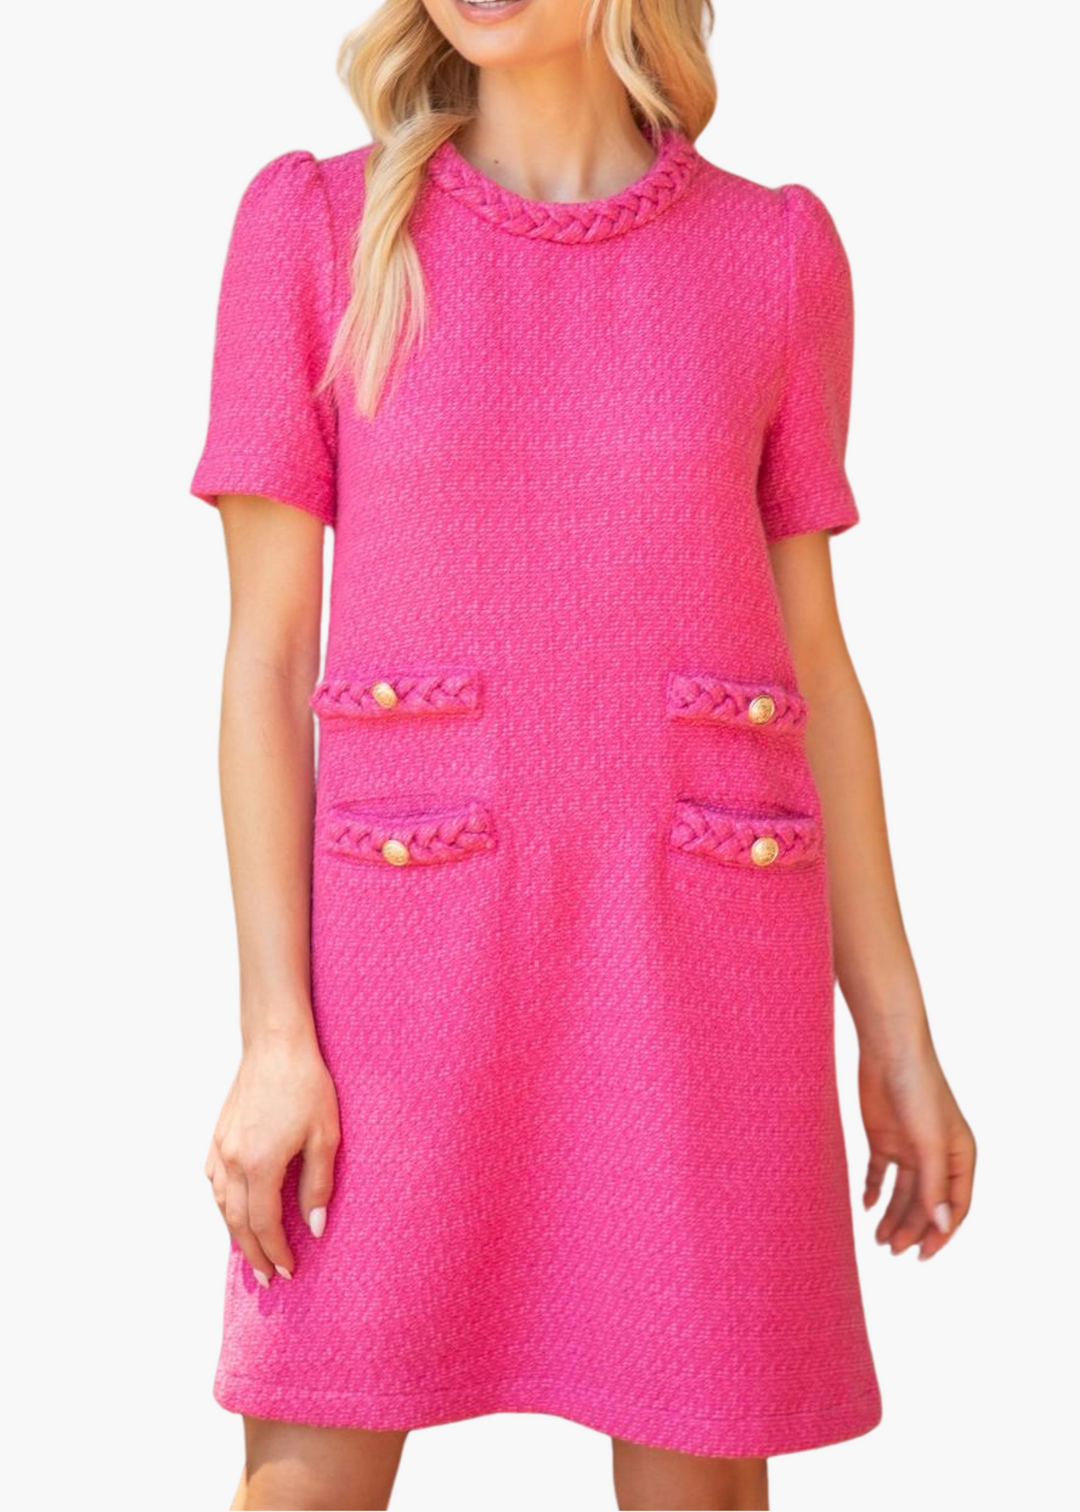 Braided Shift Dress in Pink